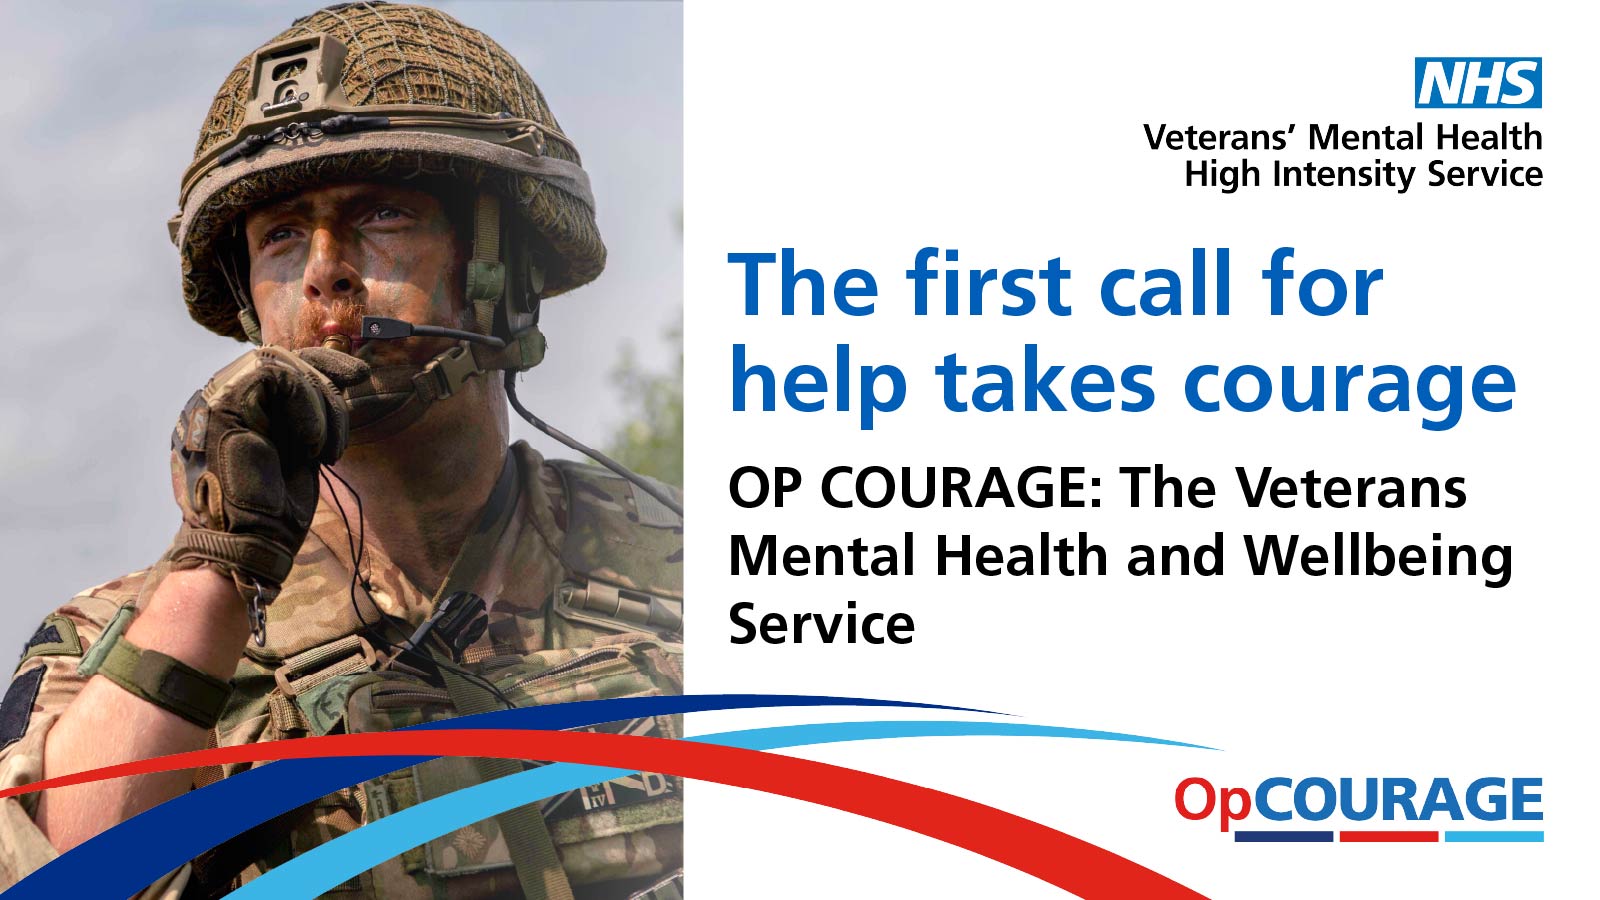 You are not alone - mental health support available for veterans